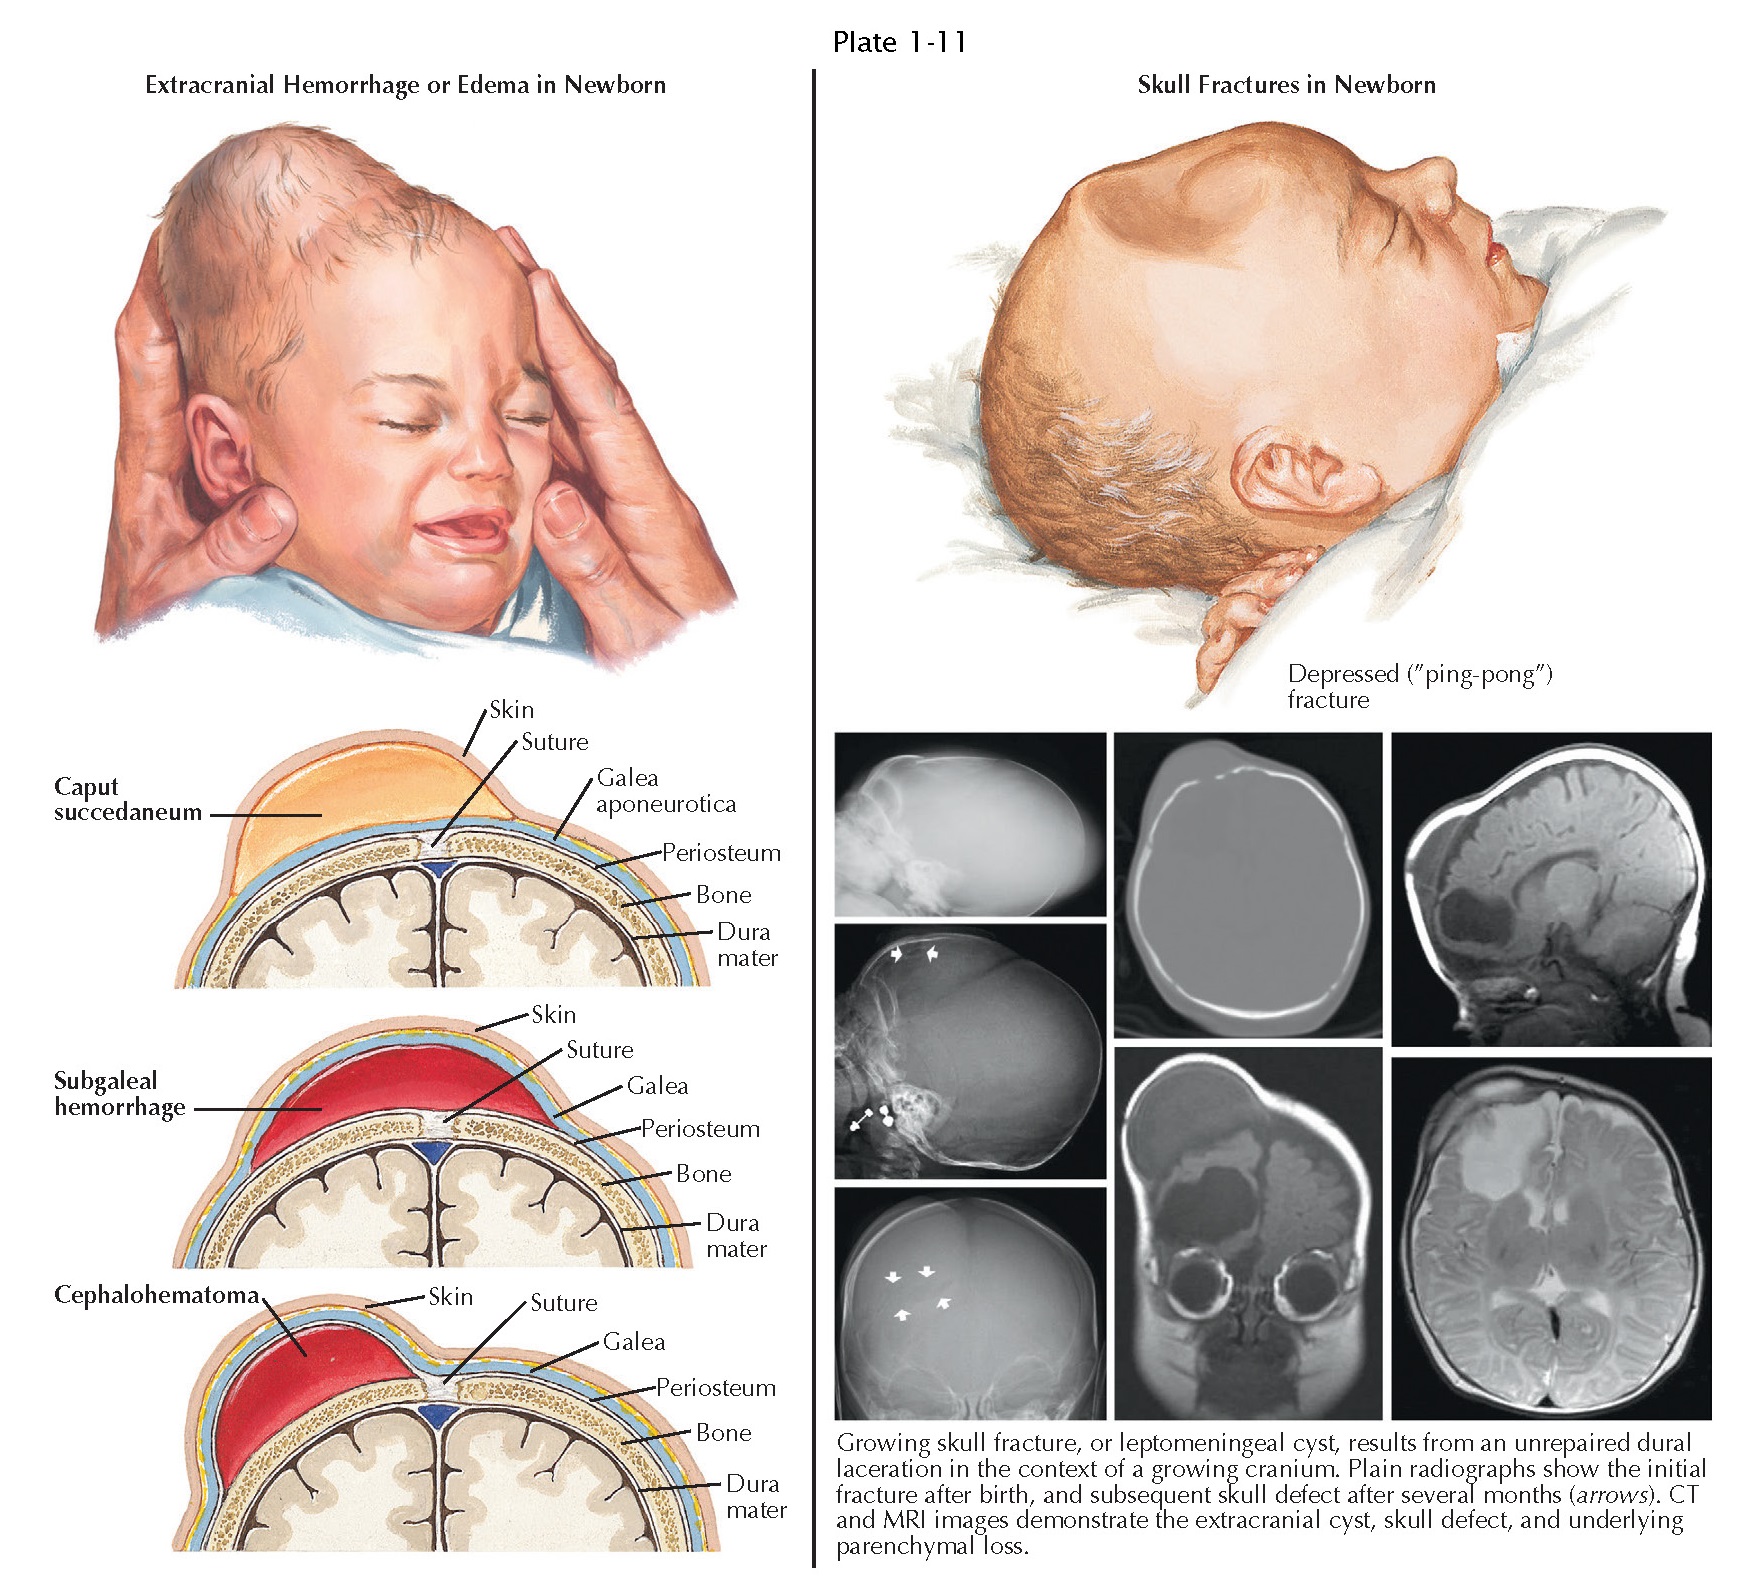 Extracranial Hemorrhage And Skull Fractures In The Newborn Pediagenosis